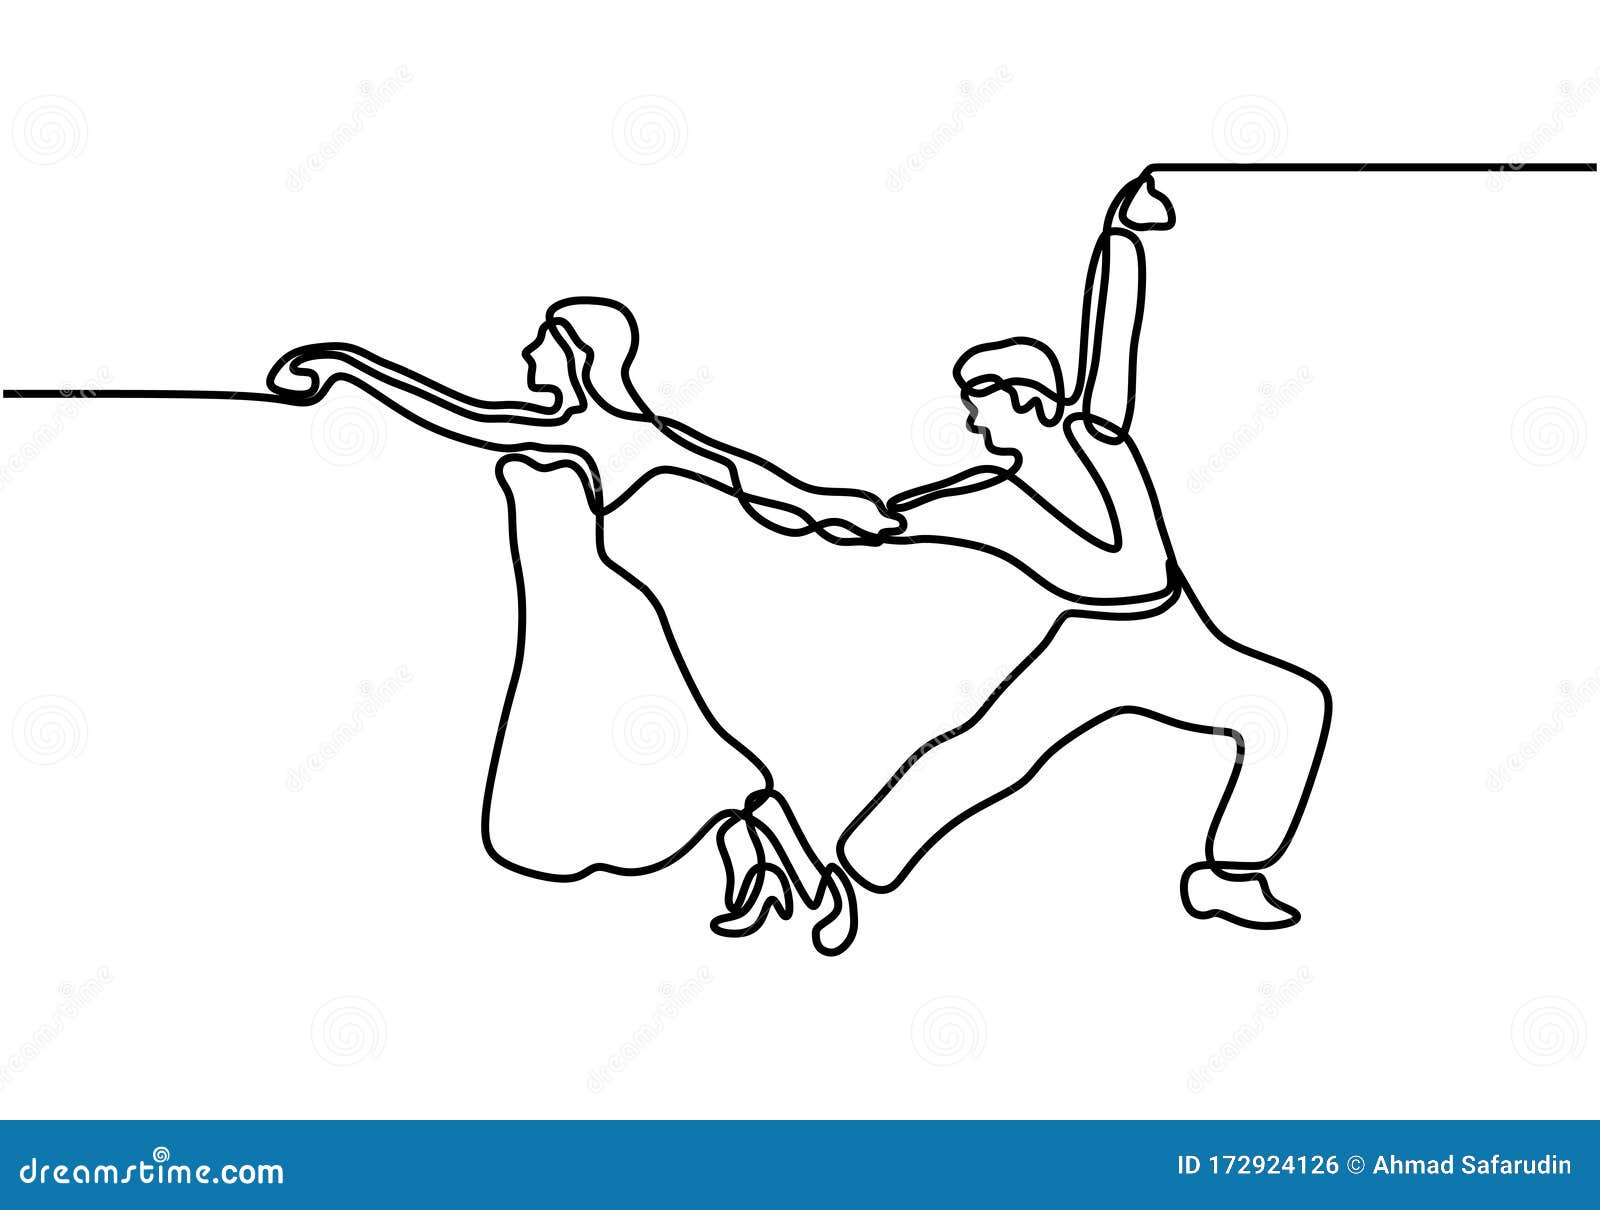 Dancing Couple One Line Drawing. Vector Man and Woman in Love Doing ...